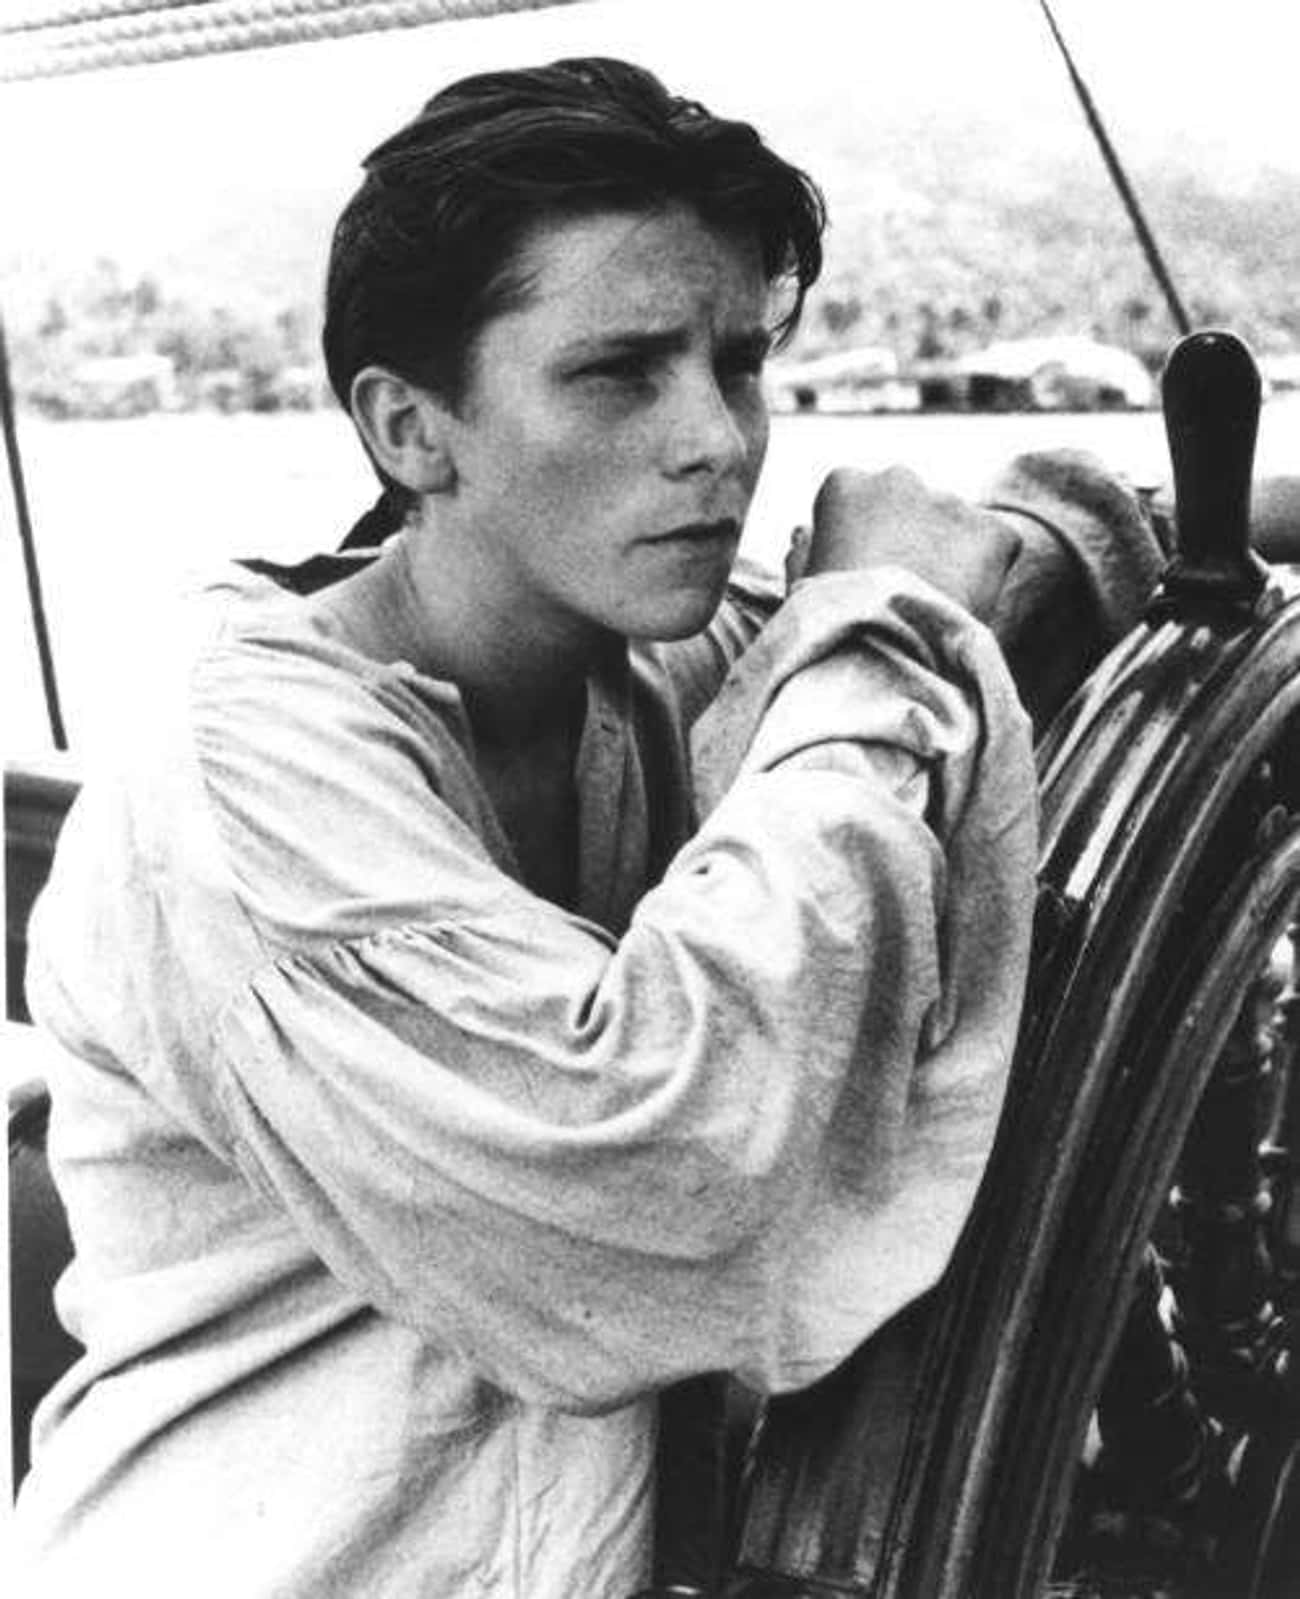 Young Christian Bale in White Blouse Steering Ship